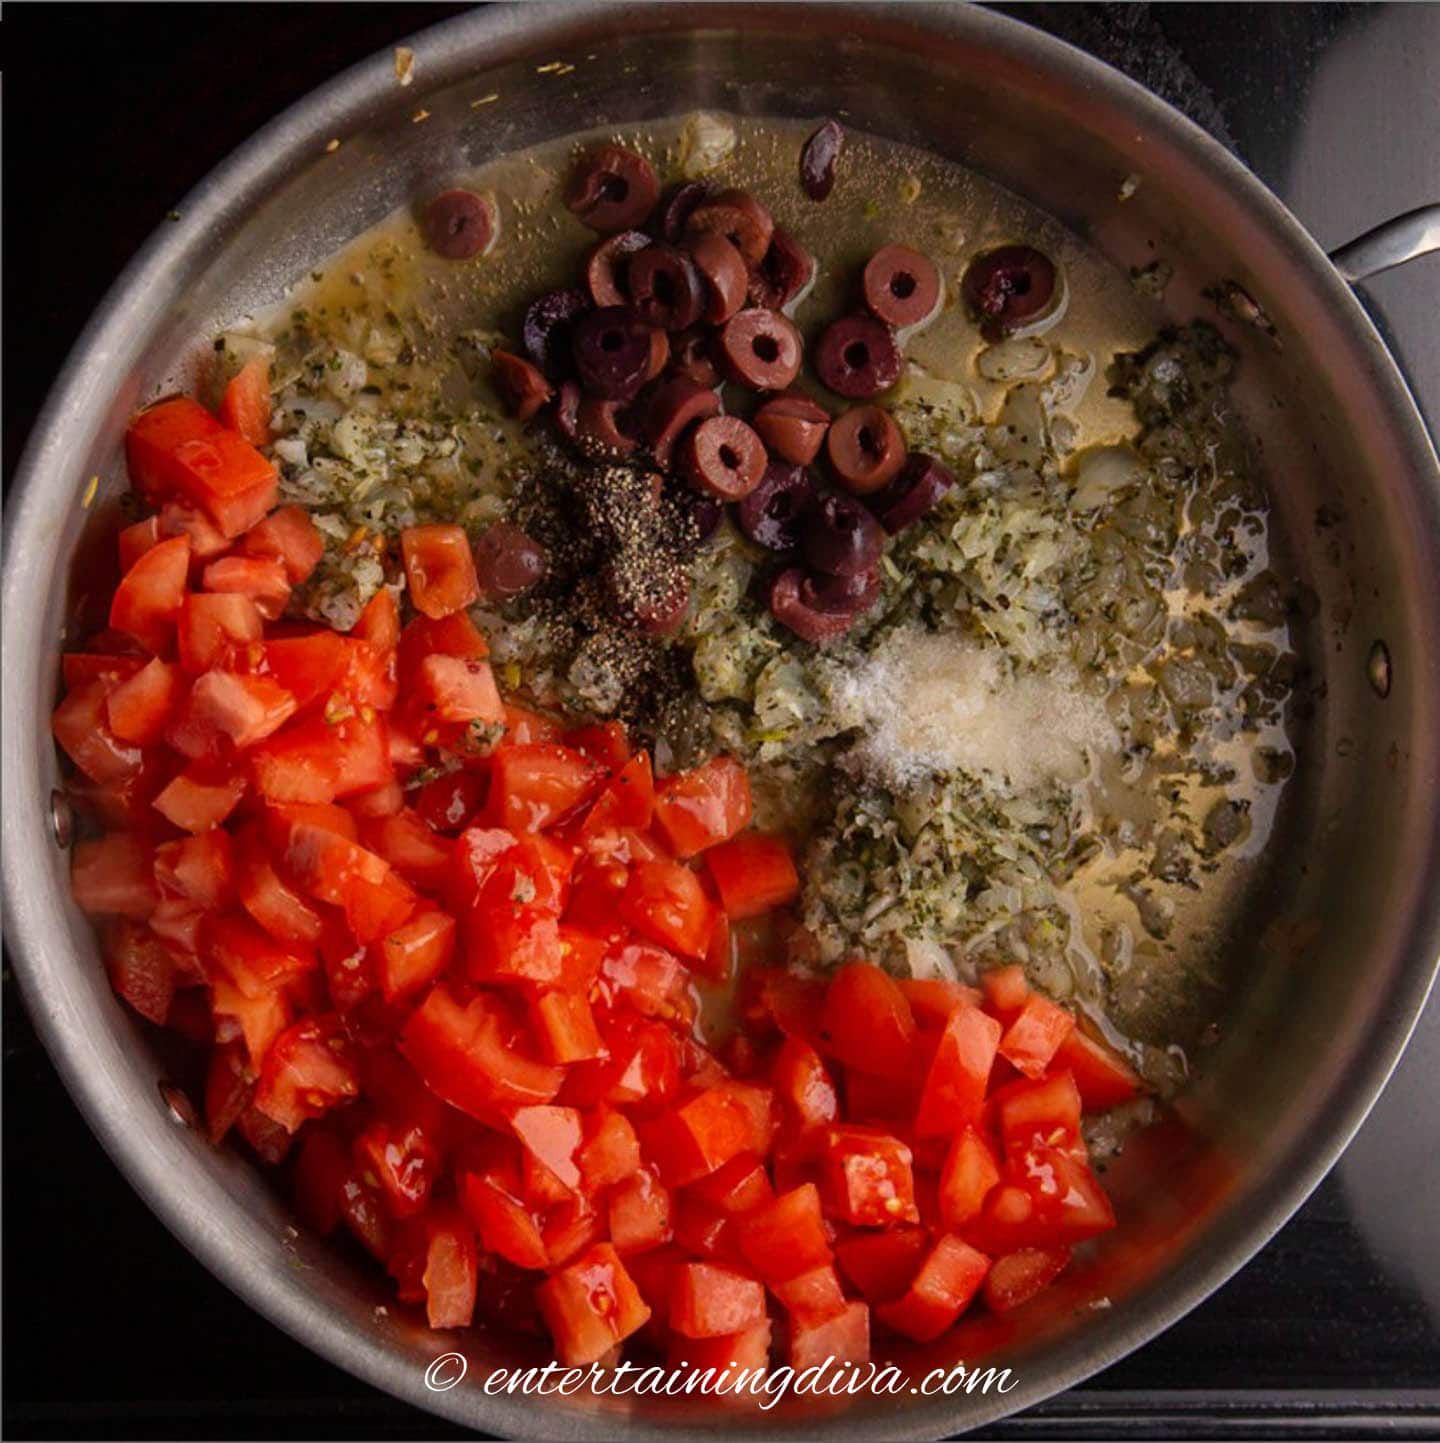 diced tomatoes, kalamata olives, onions, spices and olive oil in a saute pan